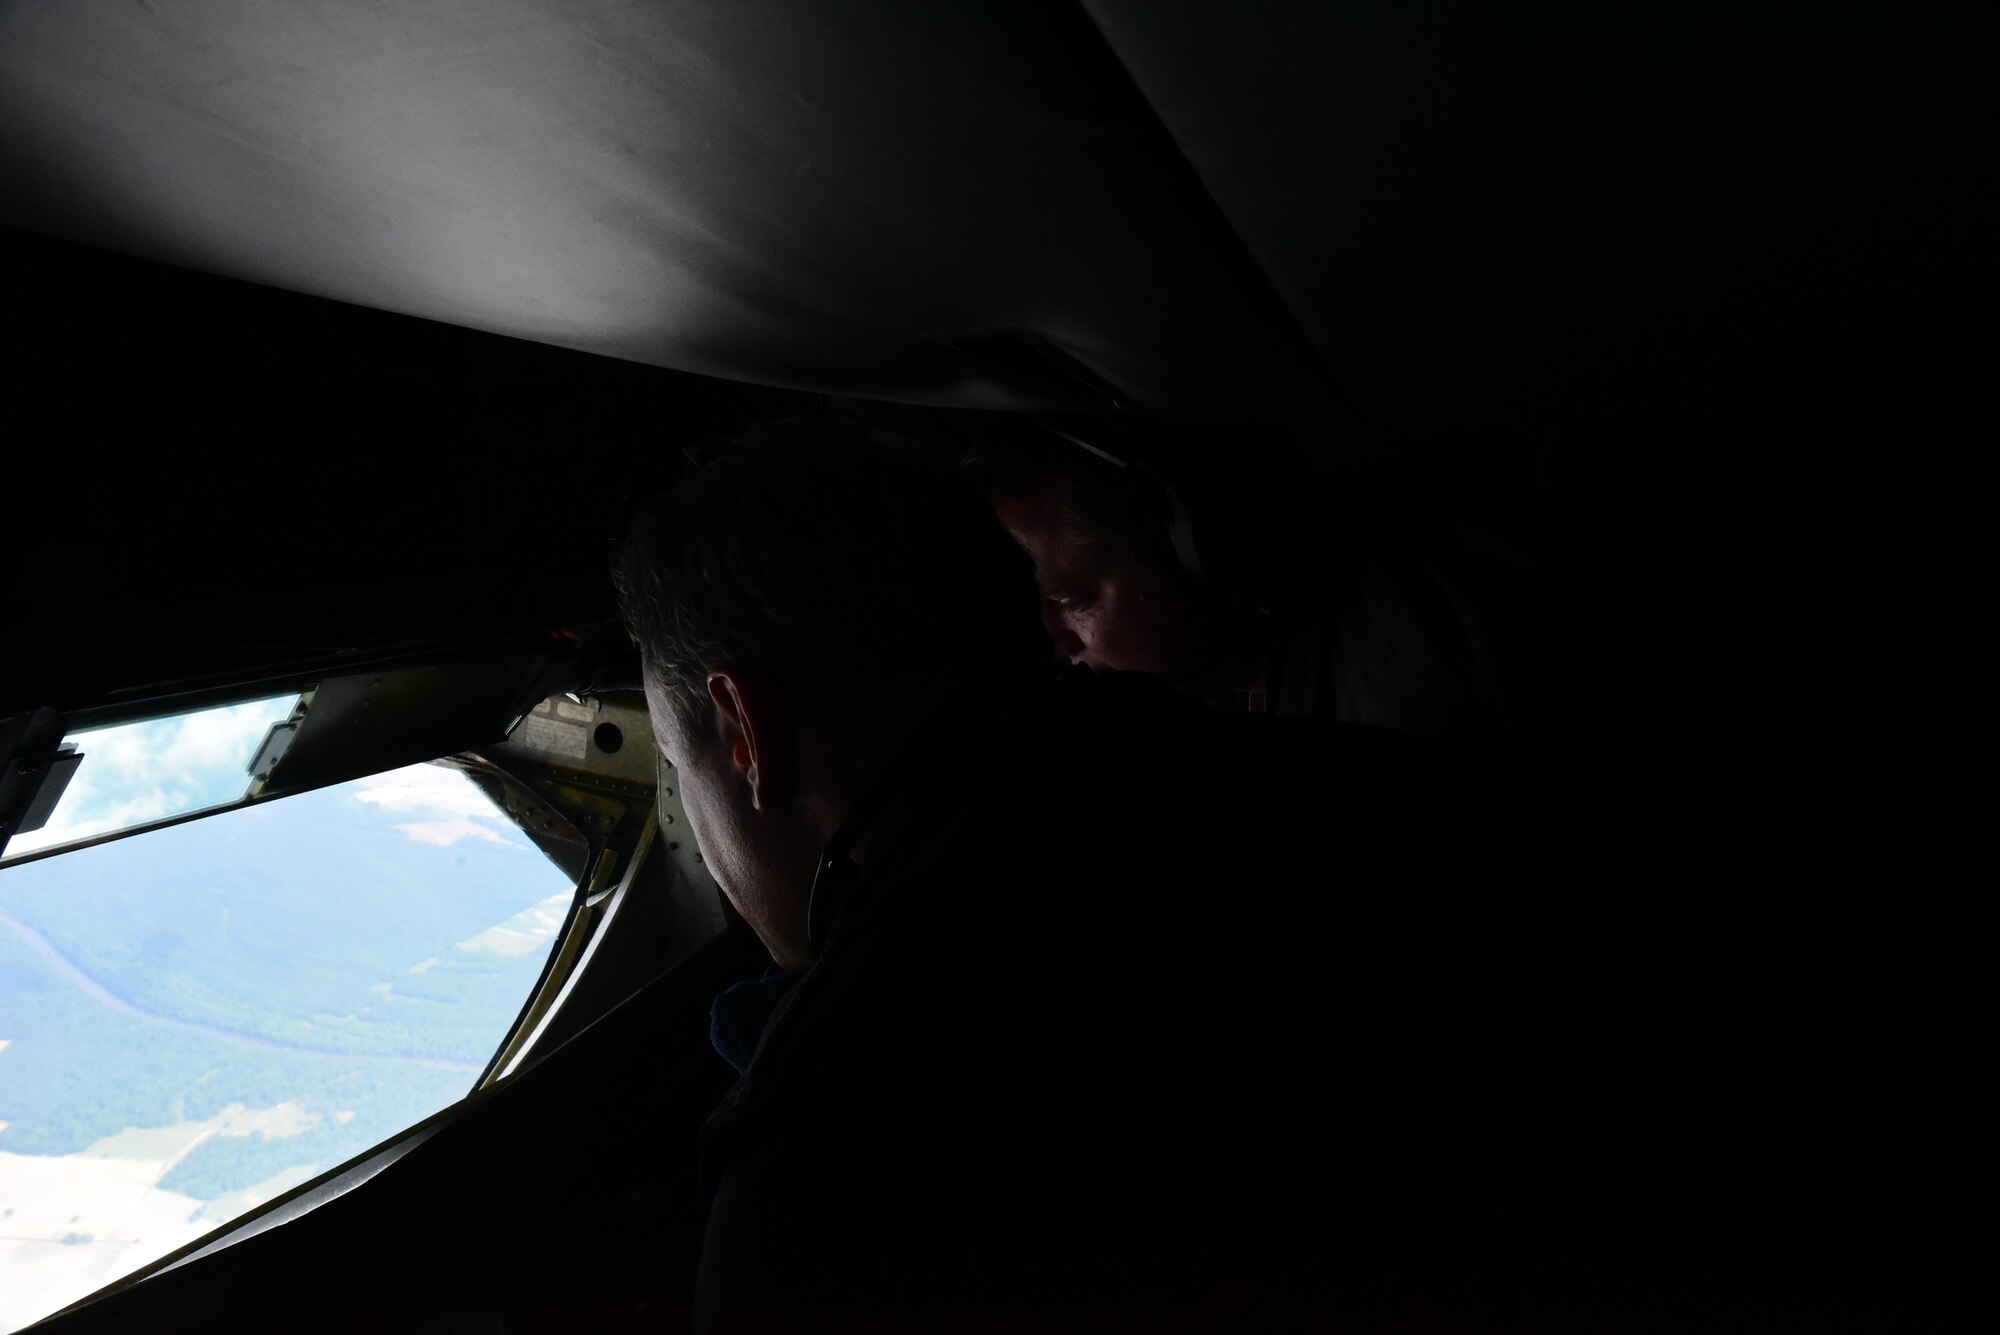 Dan Forest, North Carolina Lt. Governor, and Staff Sgt. Dan Frost, 77th Air Refueling Squadron instructor boom operator, look out of a boom operator window, May 18, 2017, in the skies over Seymour Johnson Air Force Base, North Carolina. Seymour Johnson AFB is home to the F-15E Strike Eagle and the KC-135R Stratotanker. (U.S. Air Force photo by Airman 1st Class Kenneth Boyton)